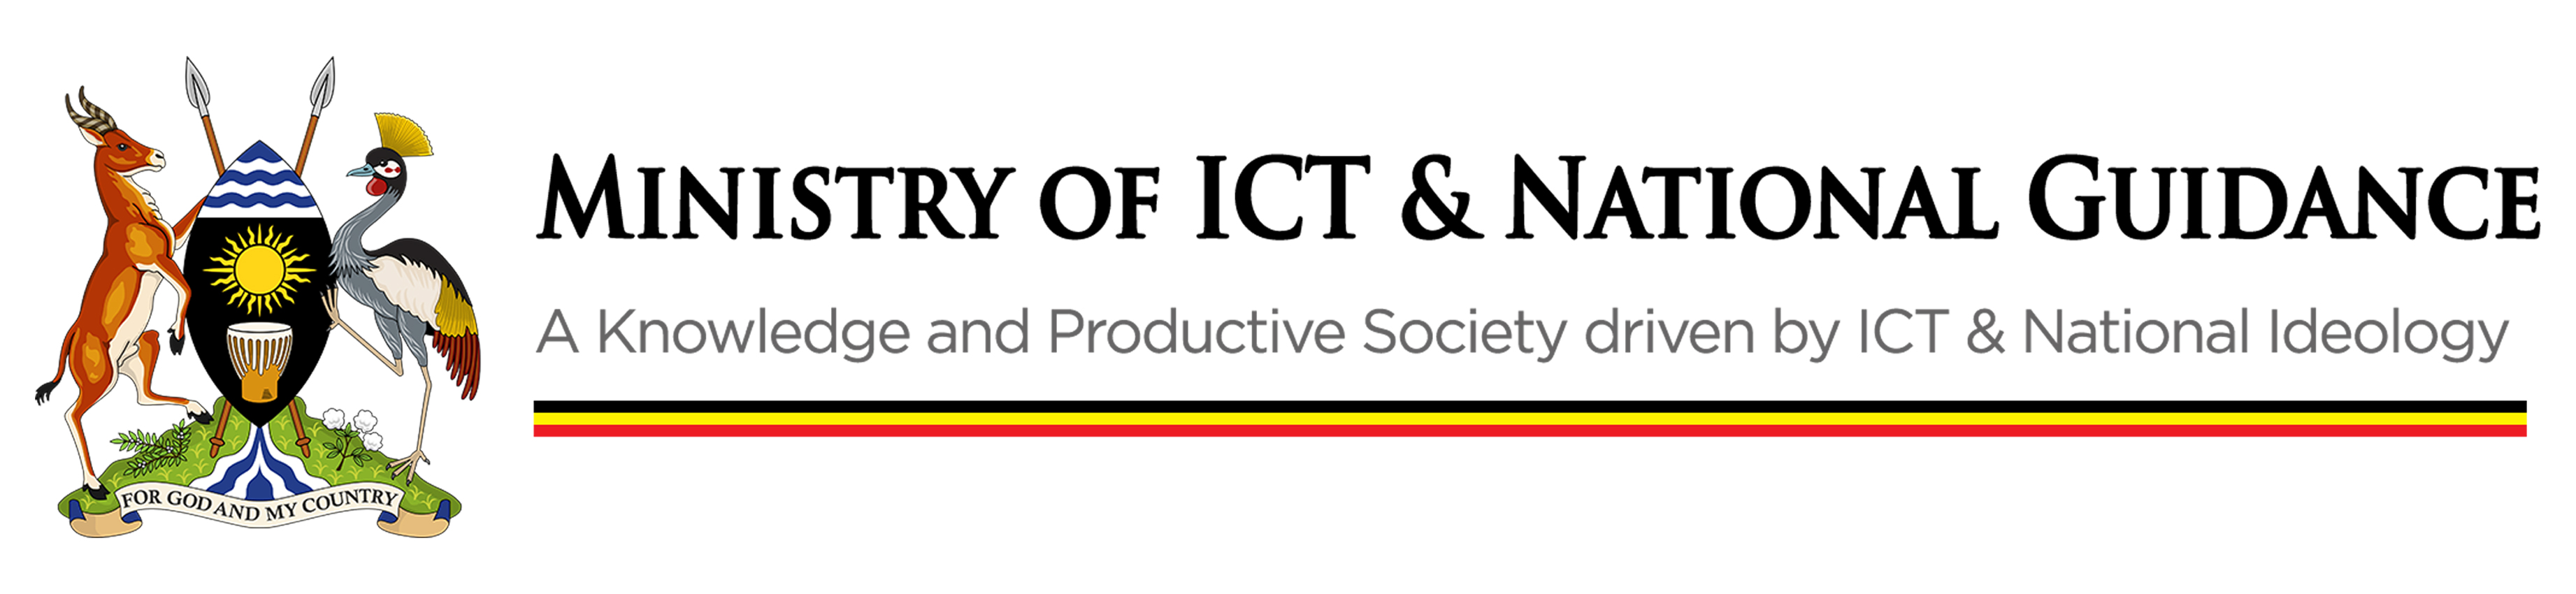 Ministry of ICT